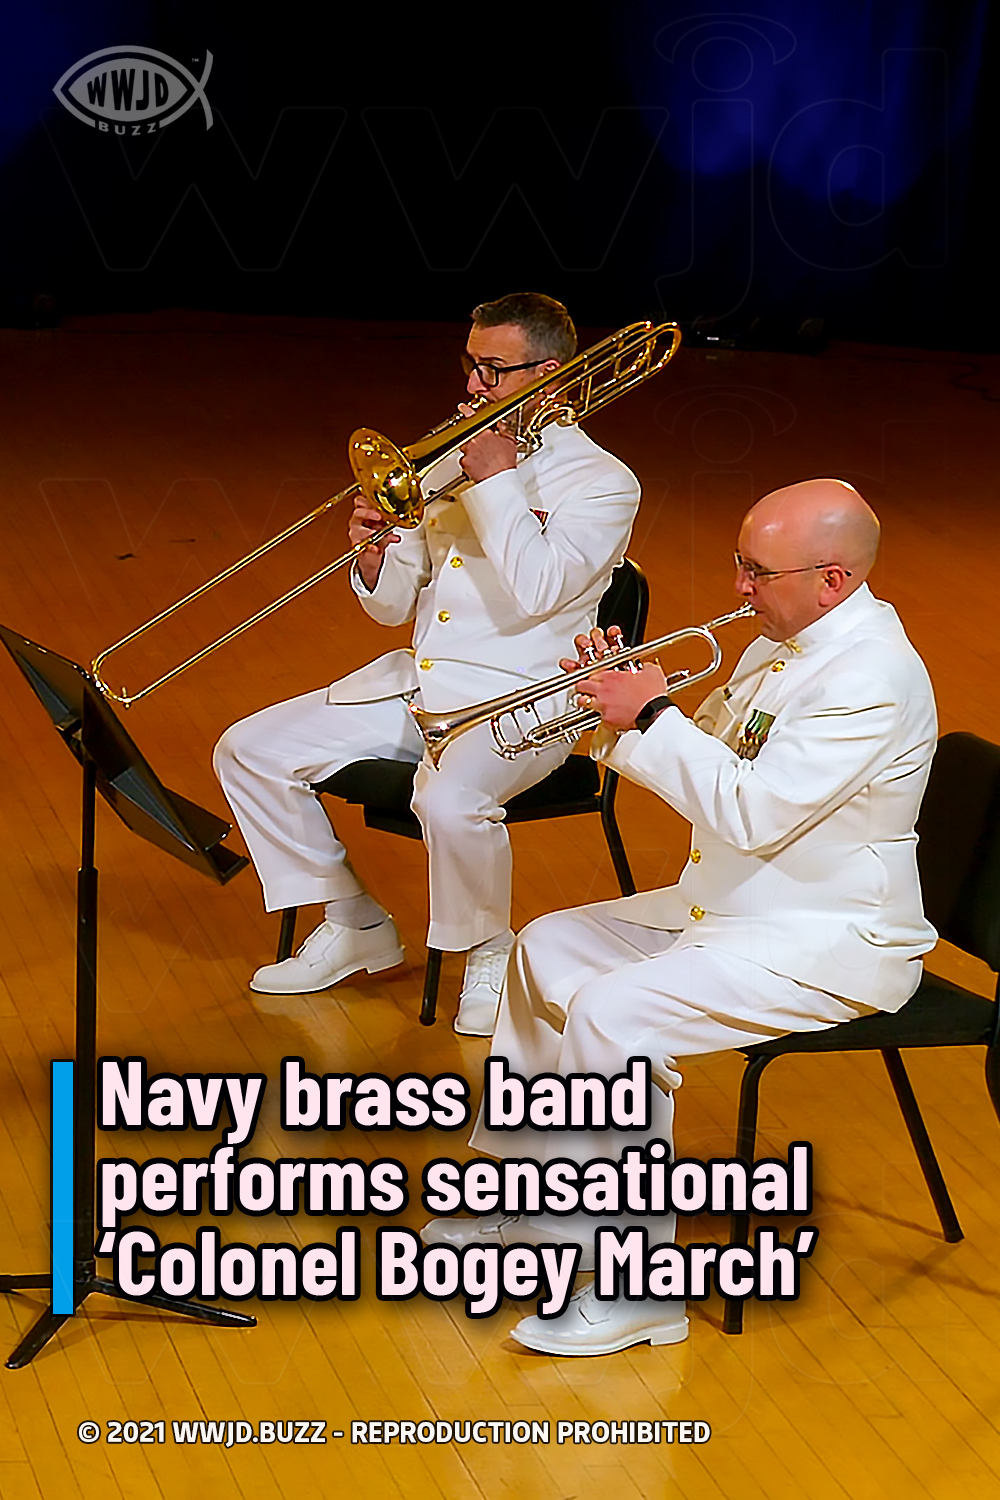 Navy brass band performs sensational ‘Colonel Bogey March’